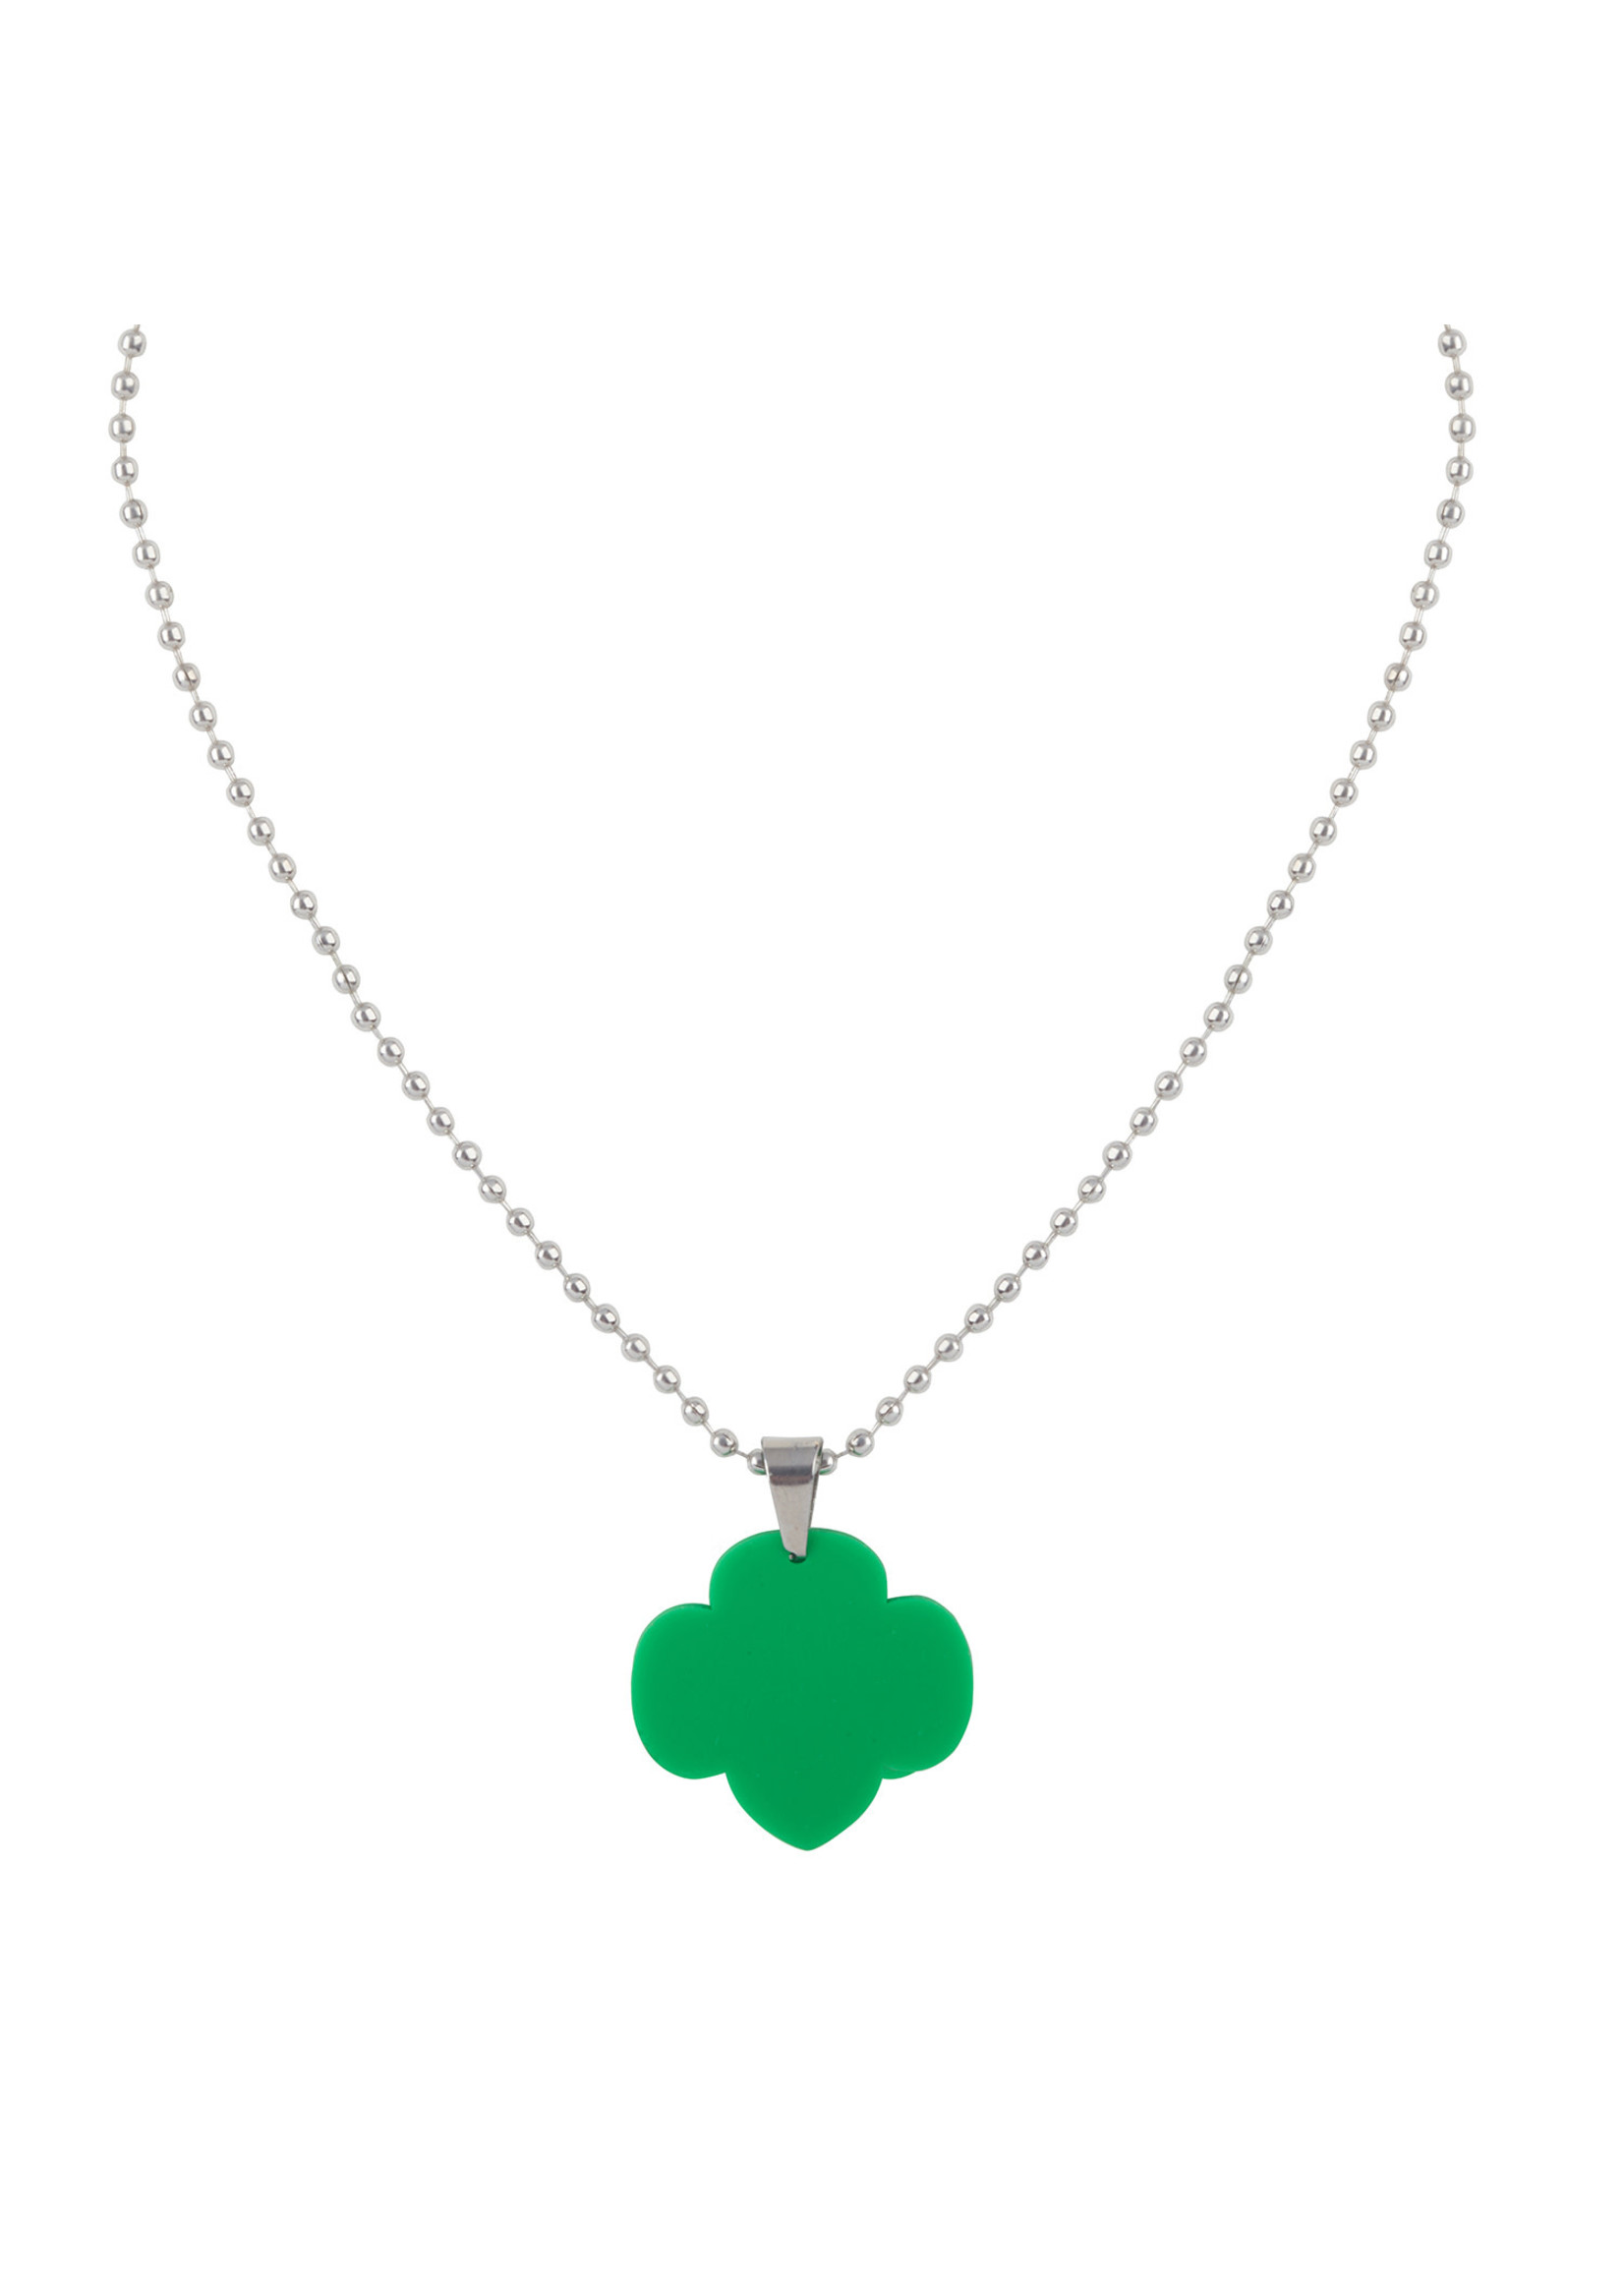 Girl Scout Trefoil Charm Necklace -TFF